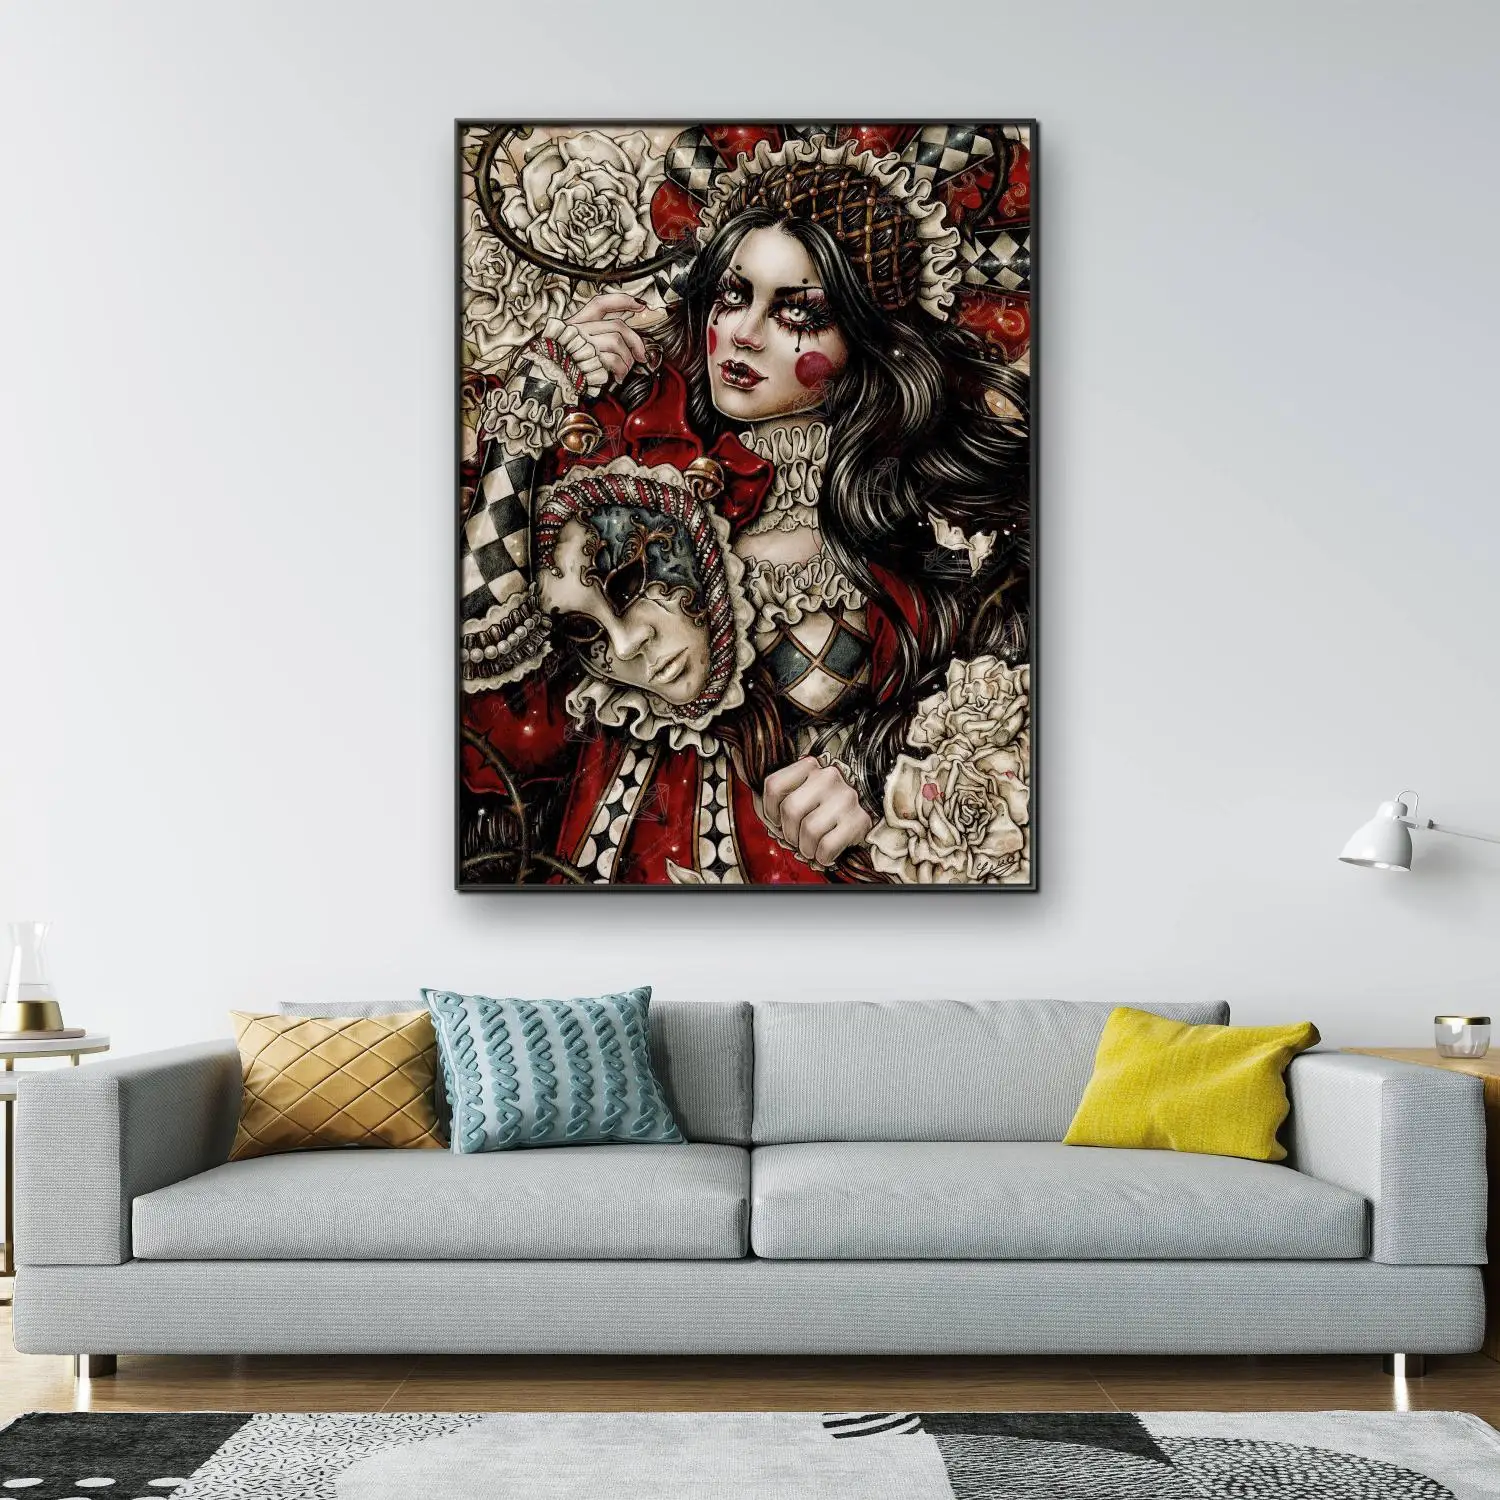 

Gothic Style DIY 5D Diamond Art Painting Woman In Mask Home Decoration Friend Gift Full Diamond Embroidery Cross Stitch Kit